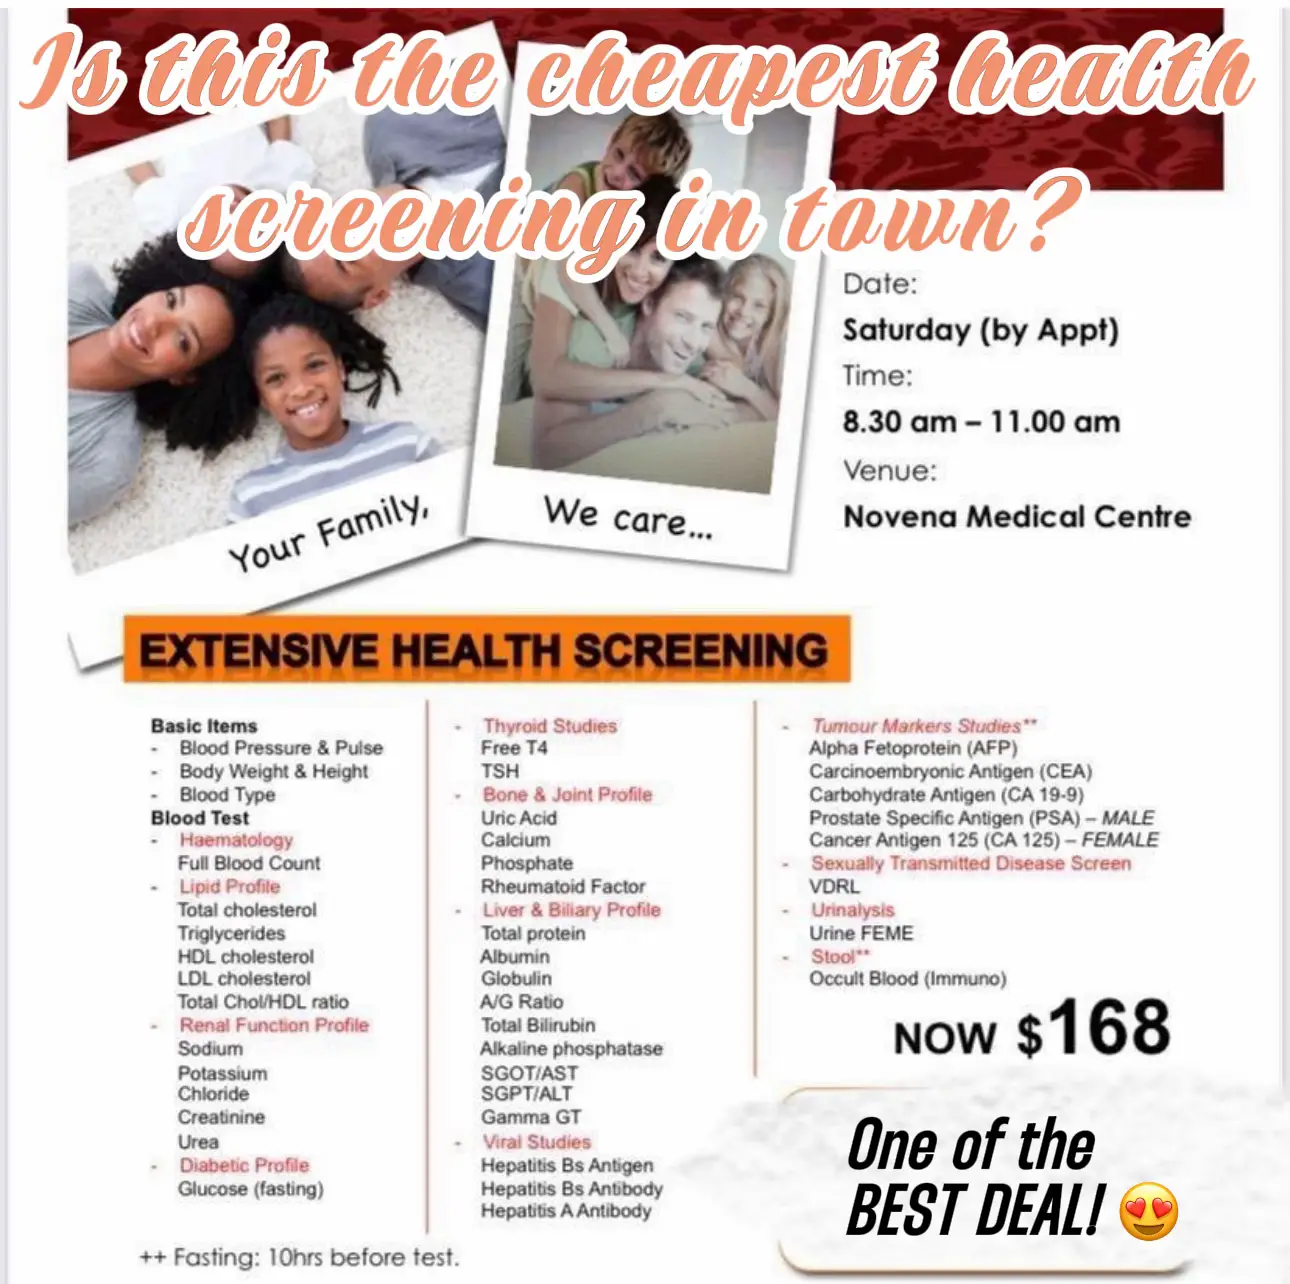 CHEAPEST HEALTH SCREENING IN TOWN? 🤔's images(0)